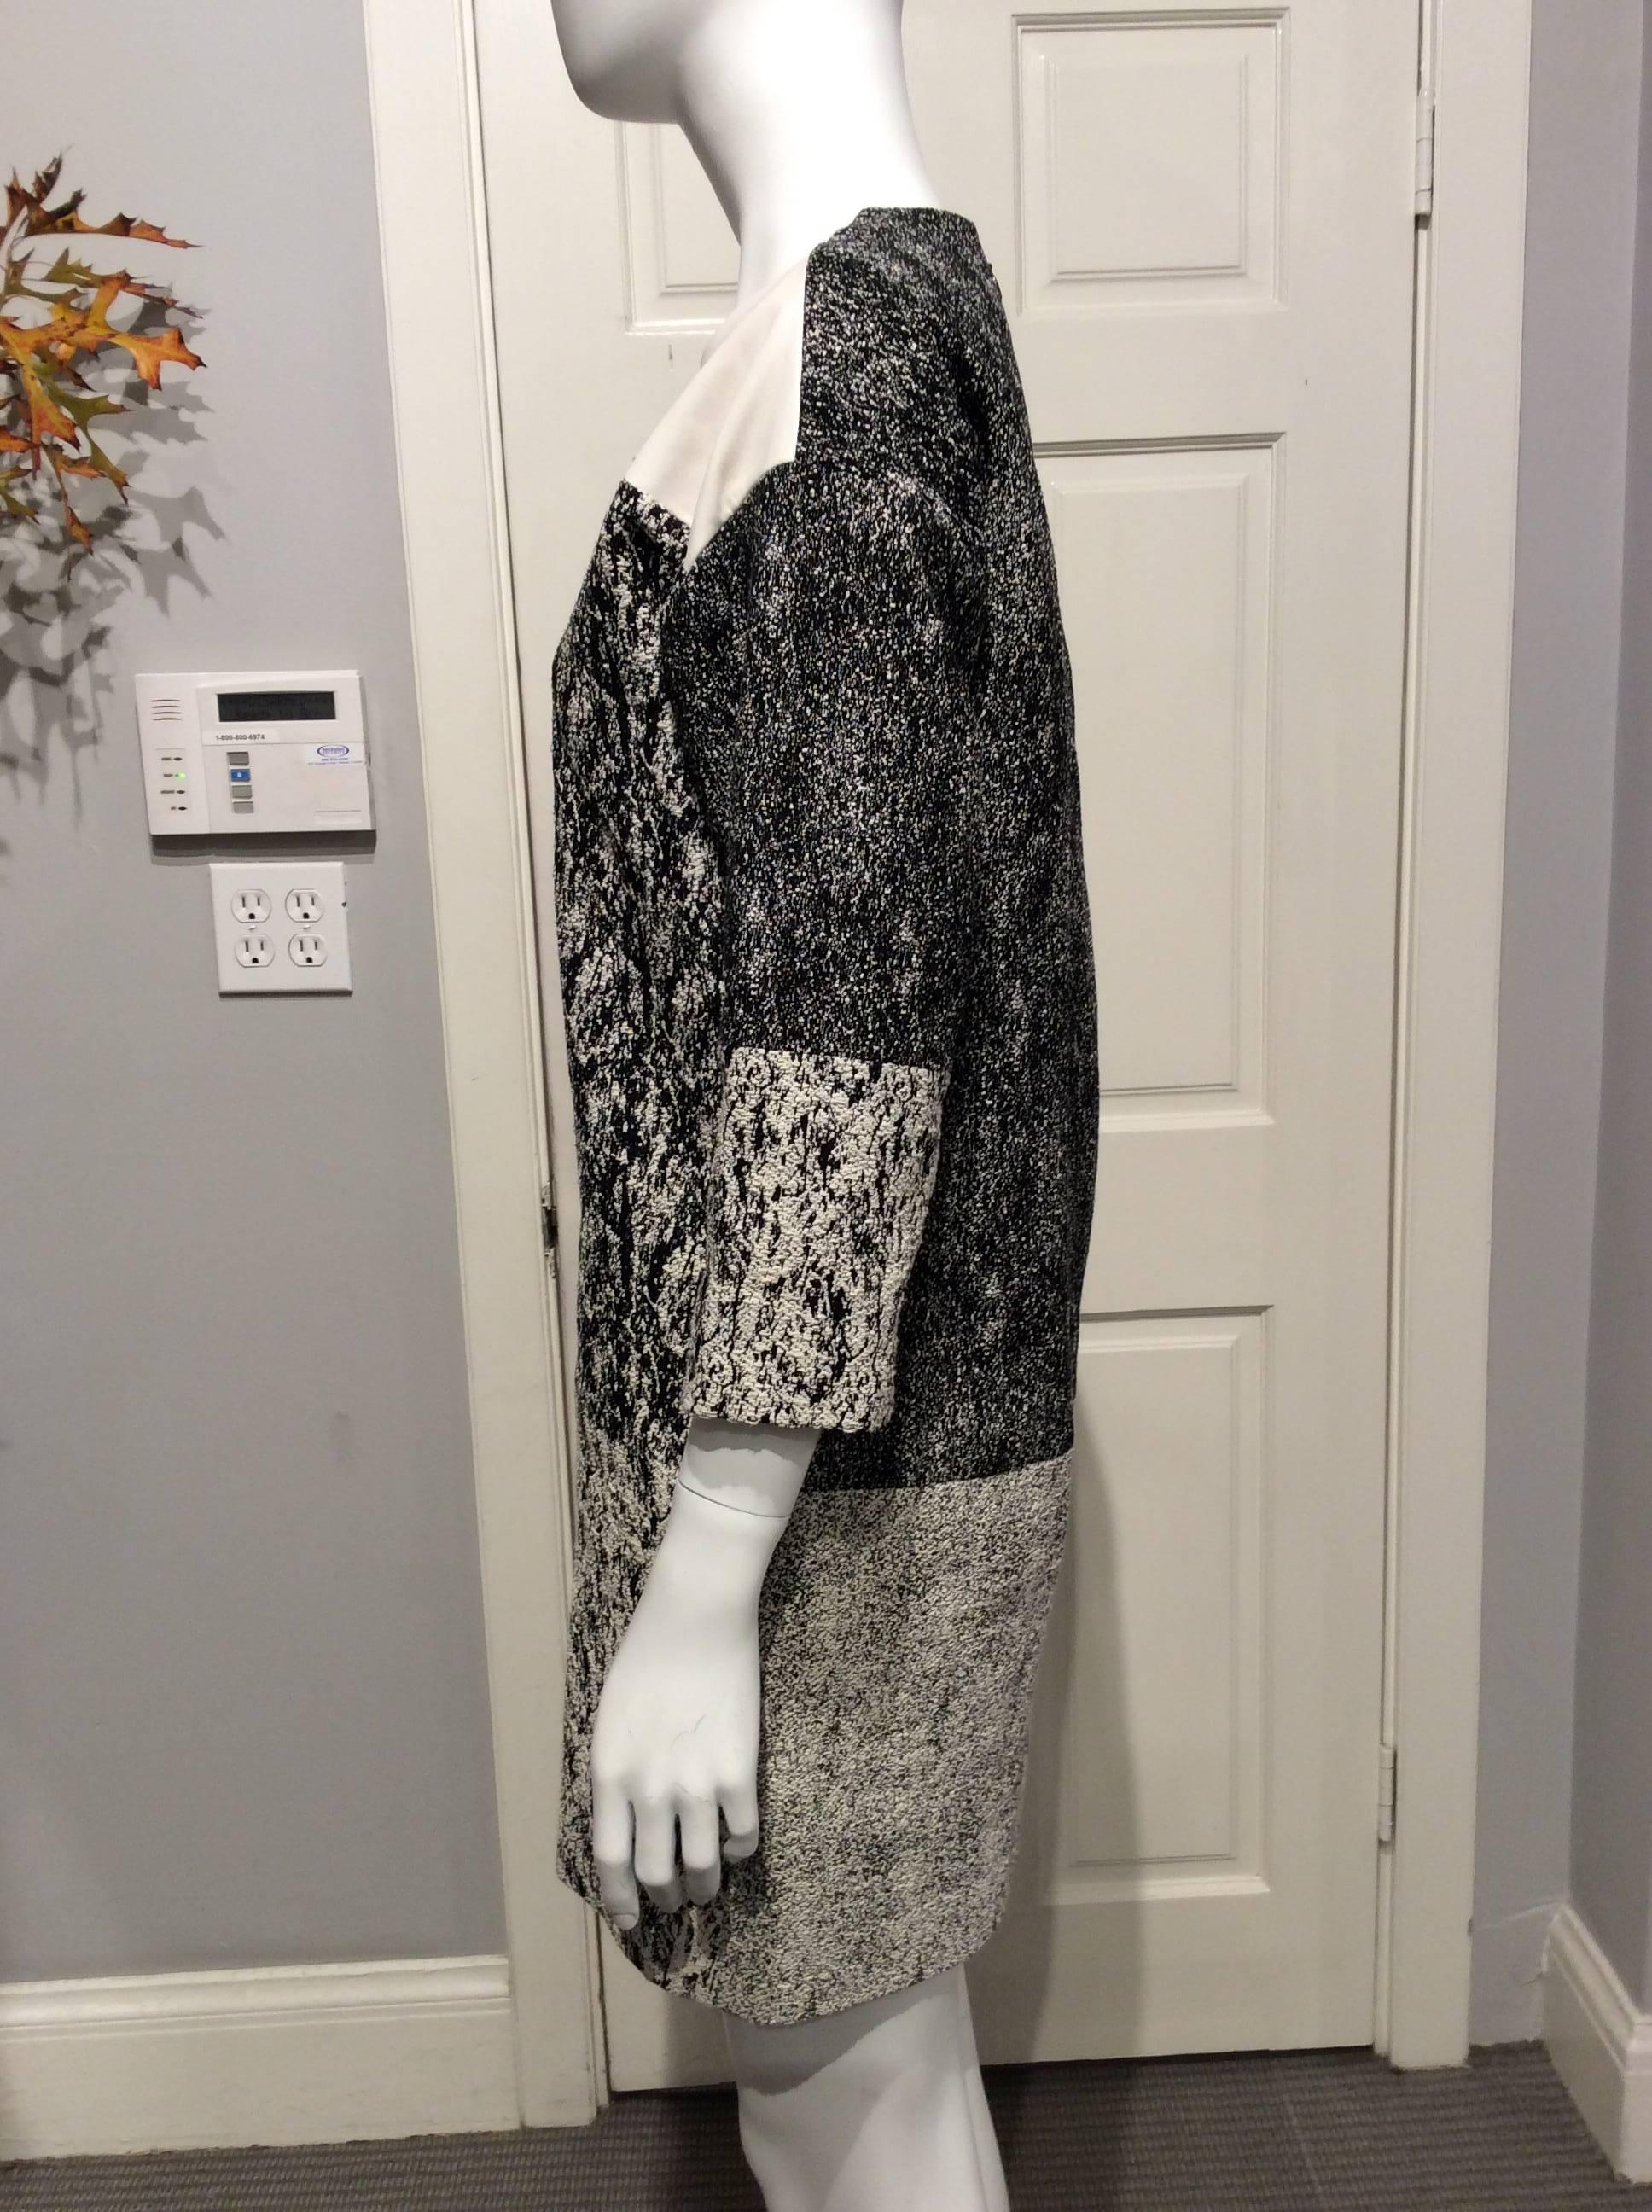 Black and cream patterned Celine dress accentuated at the neck and upper sleeves by ivory colored leather panels. The dress is slightly tapered with drop shoulders and 3/4 sleeves. It has two seam pockets.